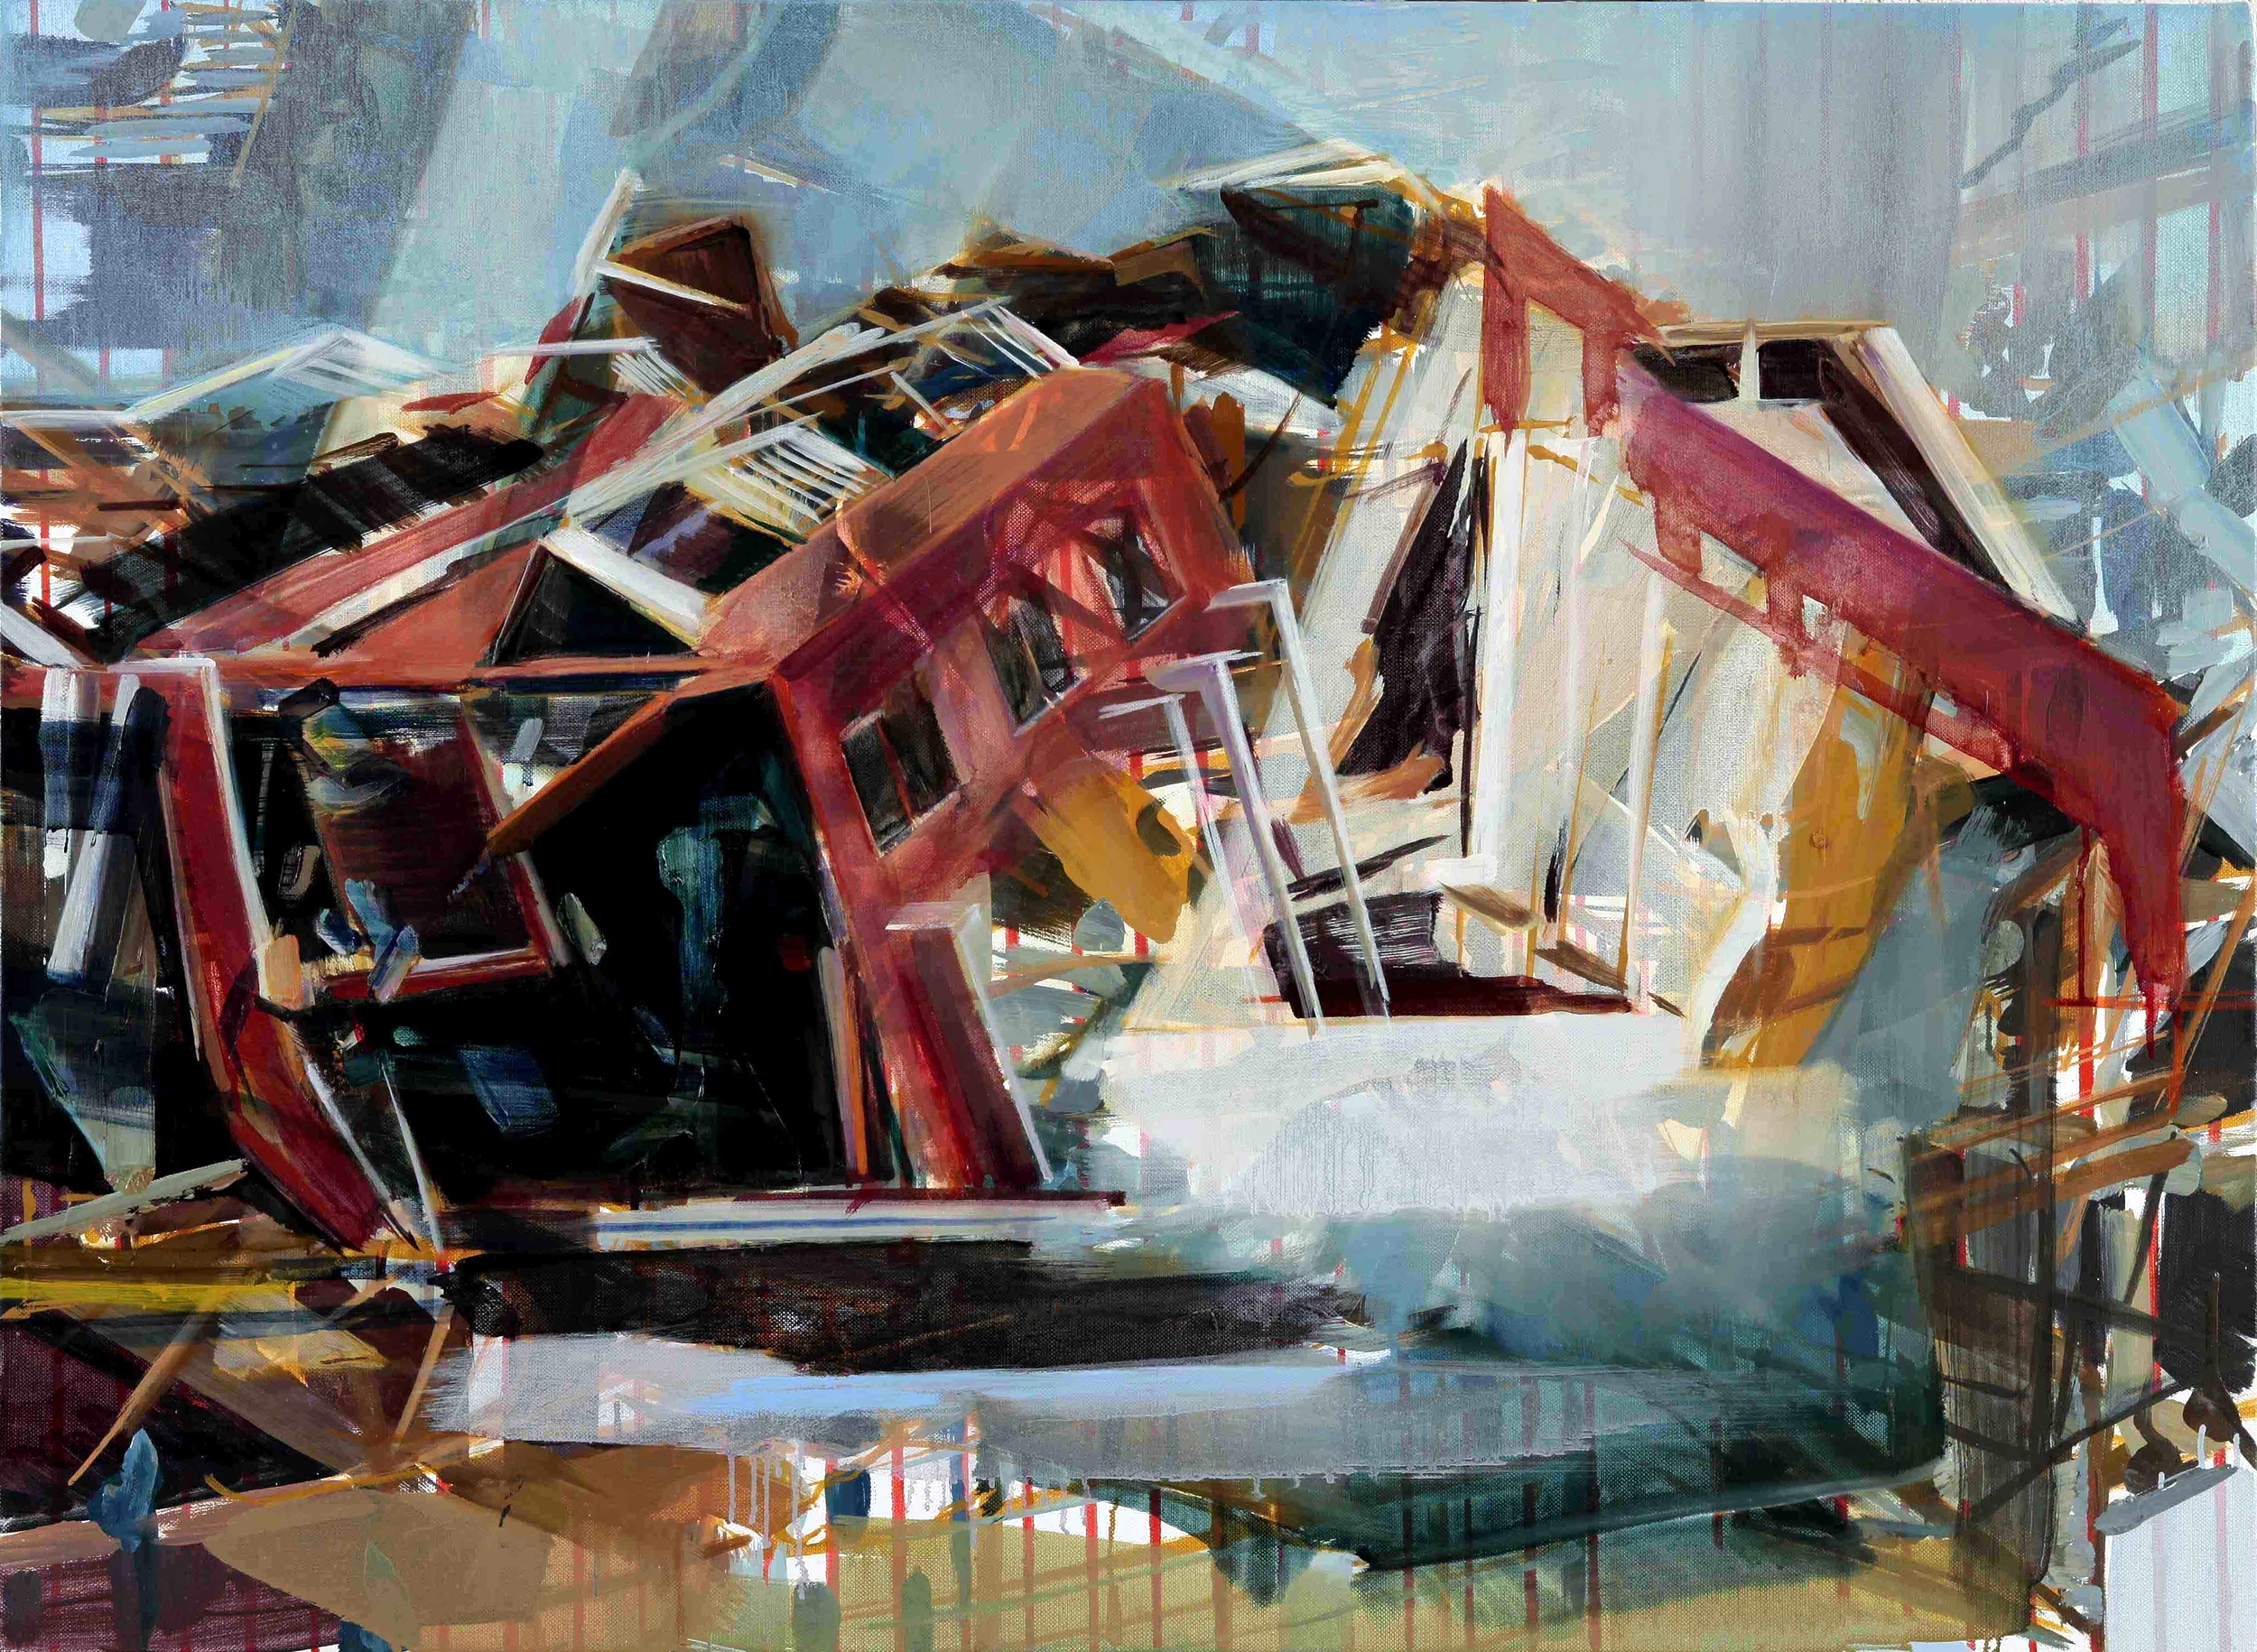   Untitled (Gulliver's Study) , 2010, oil on canvas, 73 x 100cm. Private collection, France 